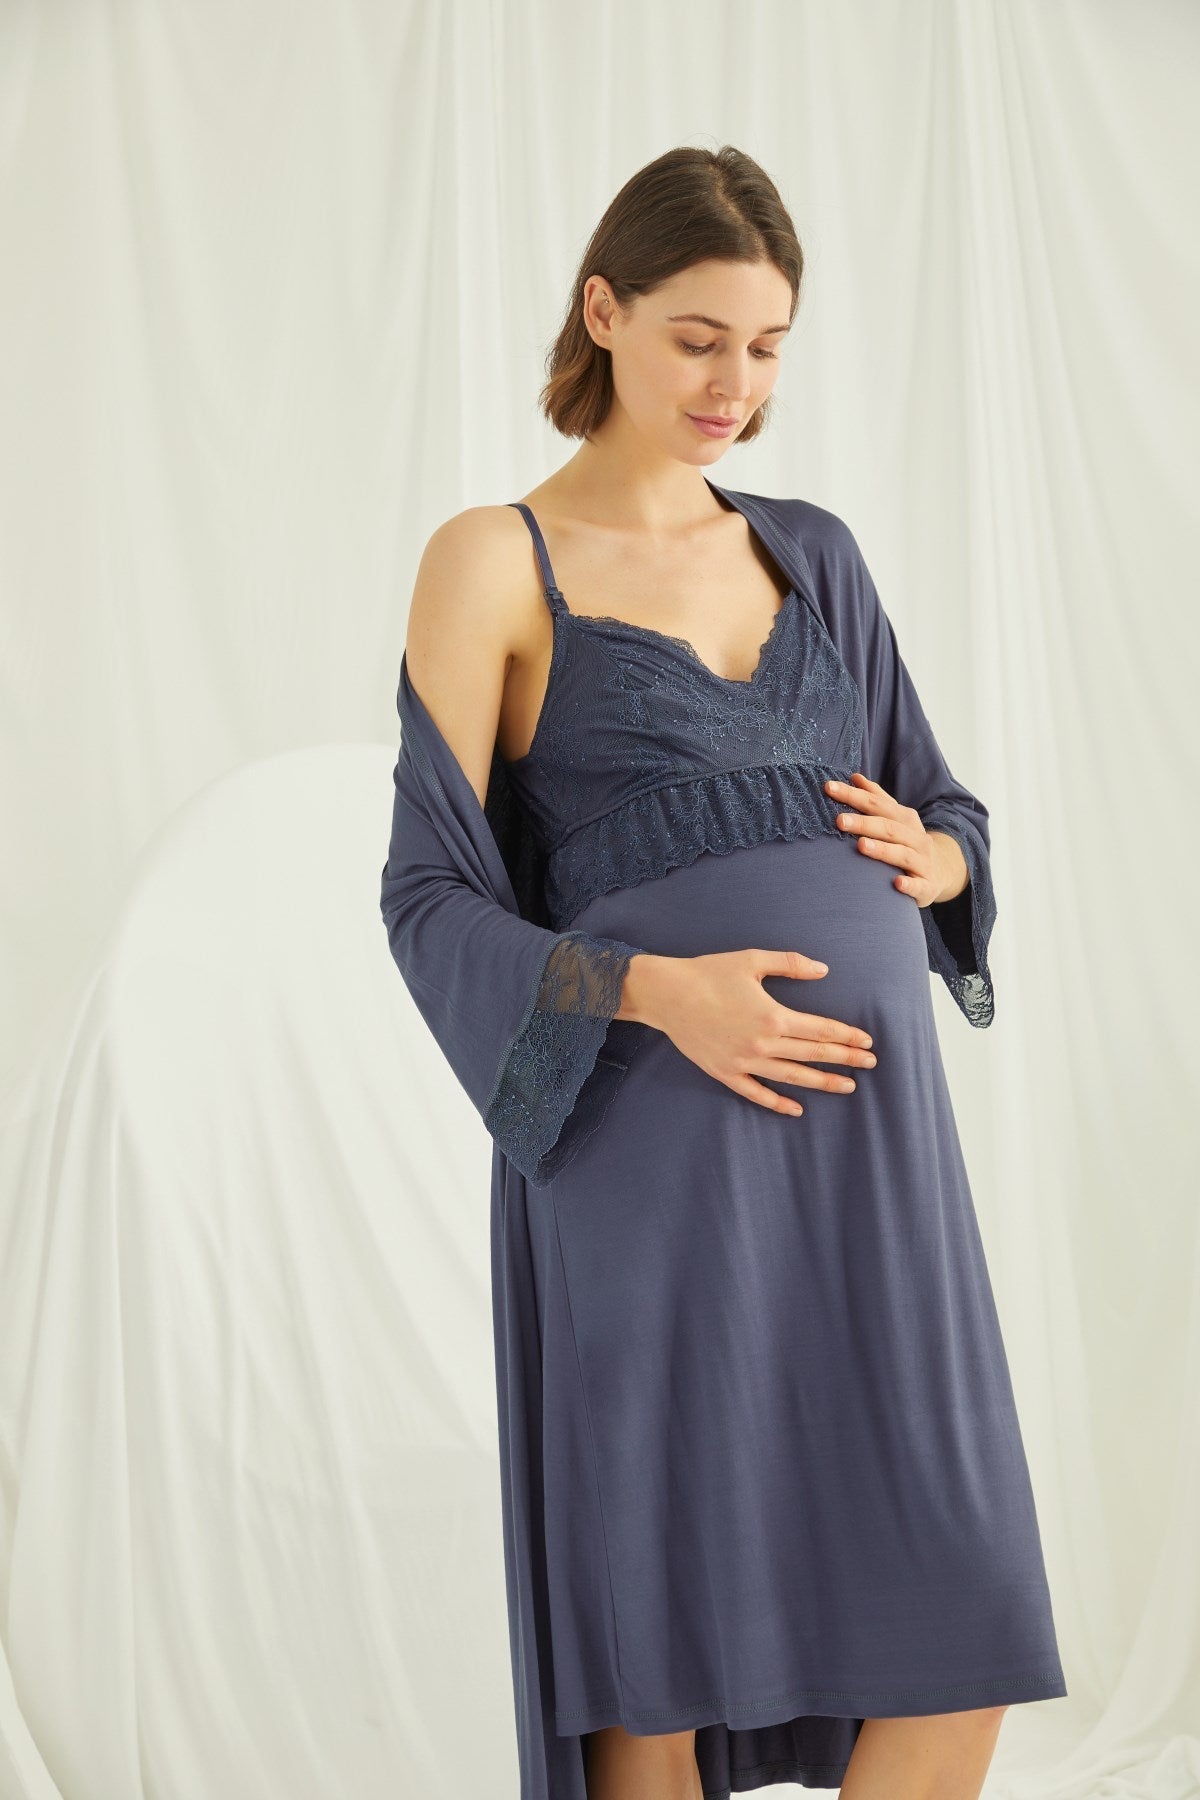 Shopymommy 18428 Lace Strappy Maternity & Nursing Nightgown With Robe Set Navy Blue